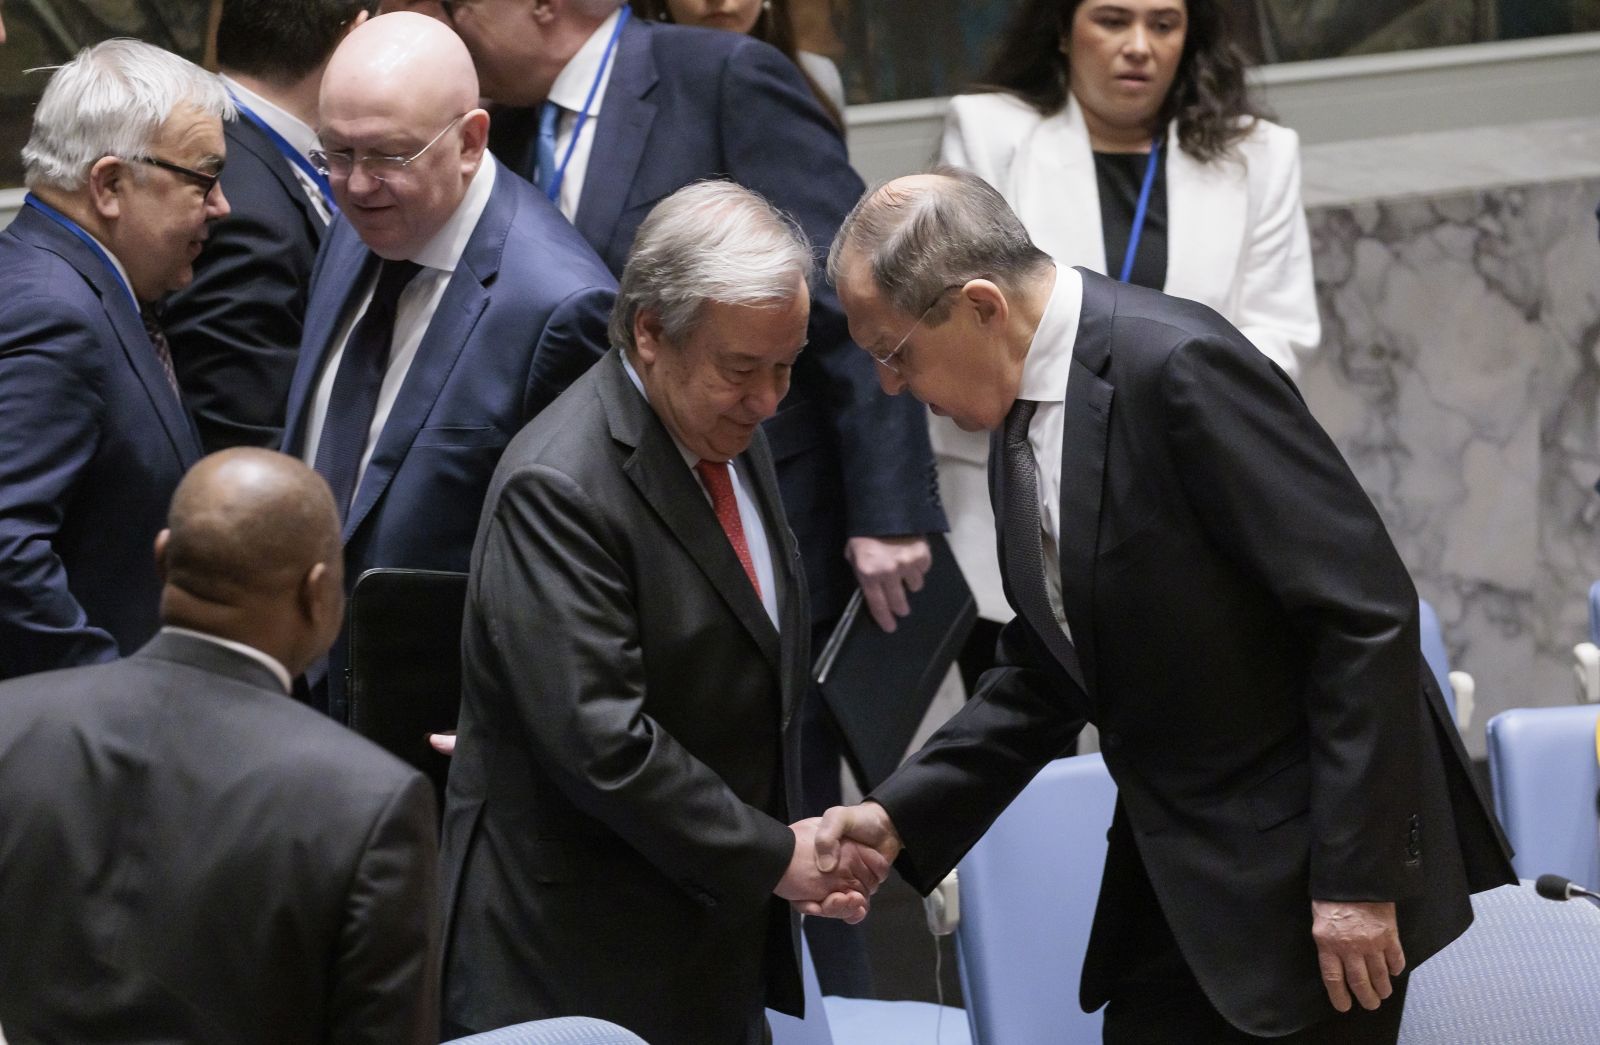 epa10589255 Russia's Foreign Minister Sergey Lavrov (R) shakes hands with United Nations Secretary-General Antonio Guterres (L), at the start of a United Nations Security Council meeting, which is being chaired by Russia for the month of April, at United Nations headquarters in New York, New York, USA, 24 April 2023.  EPA/JUSTIN LANE